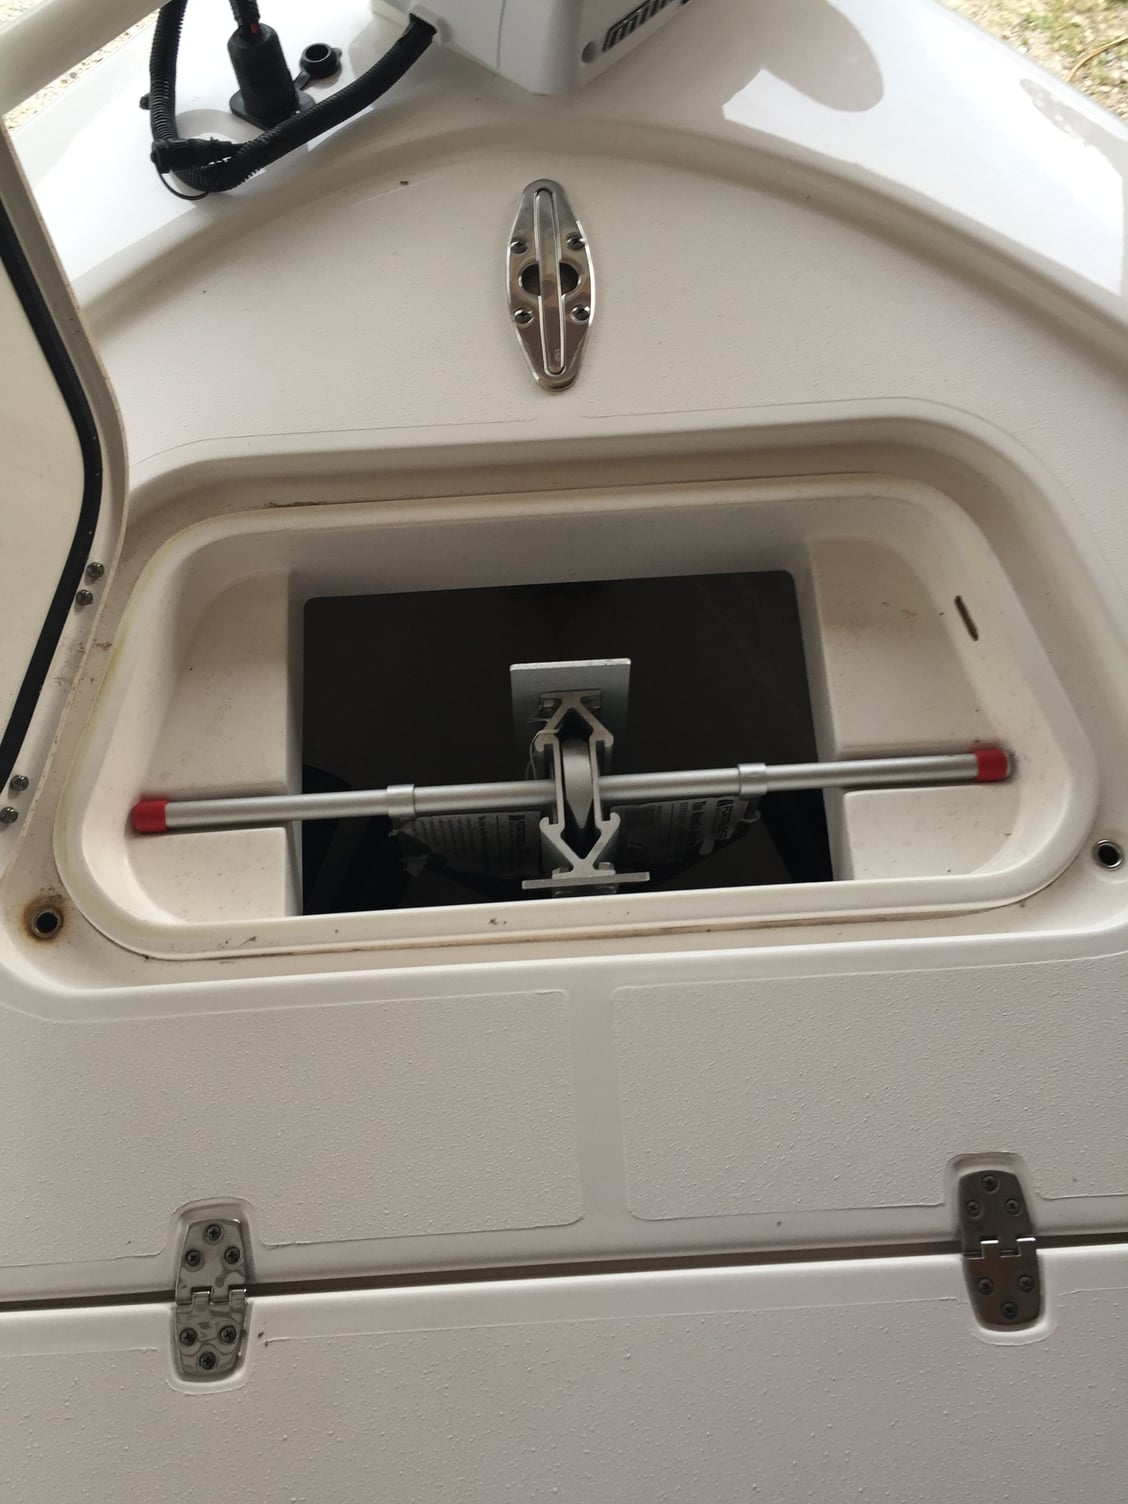 Contender 25 bay anchor locker - The Hull Truth - Boating and Fishing Forum